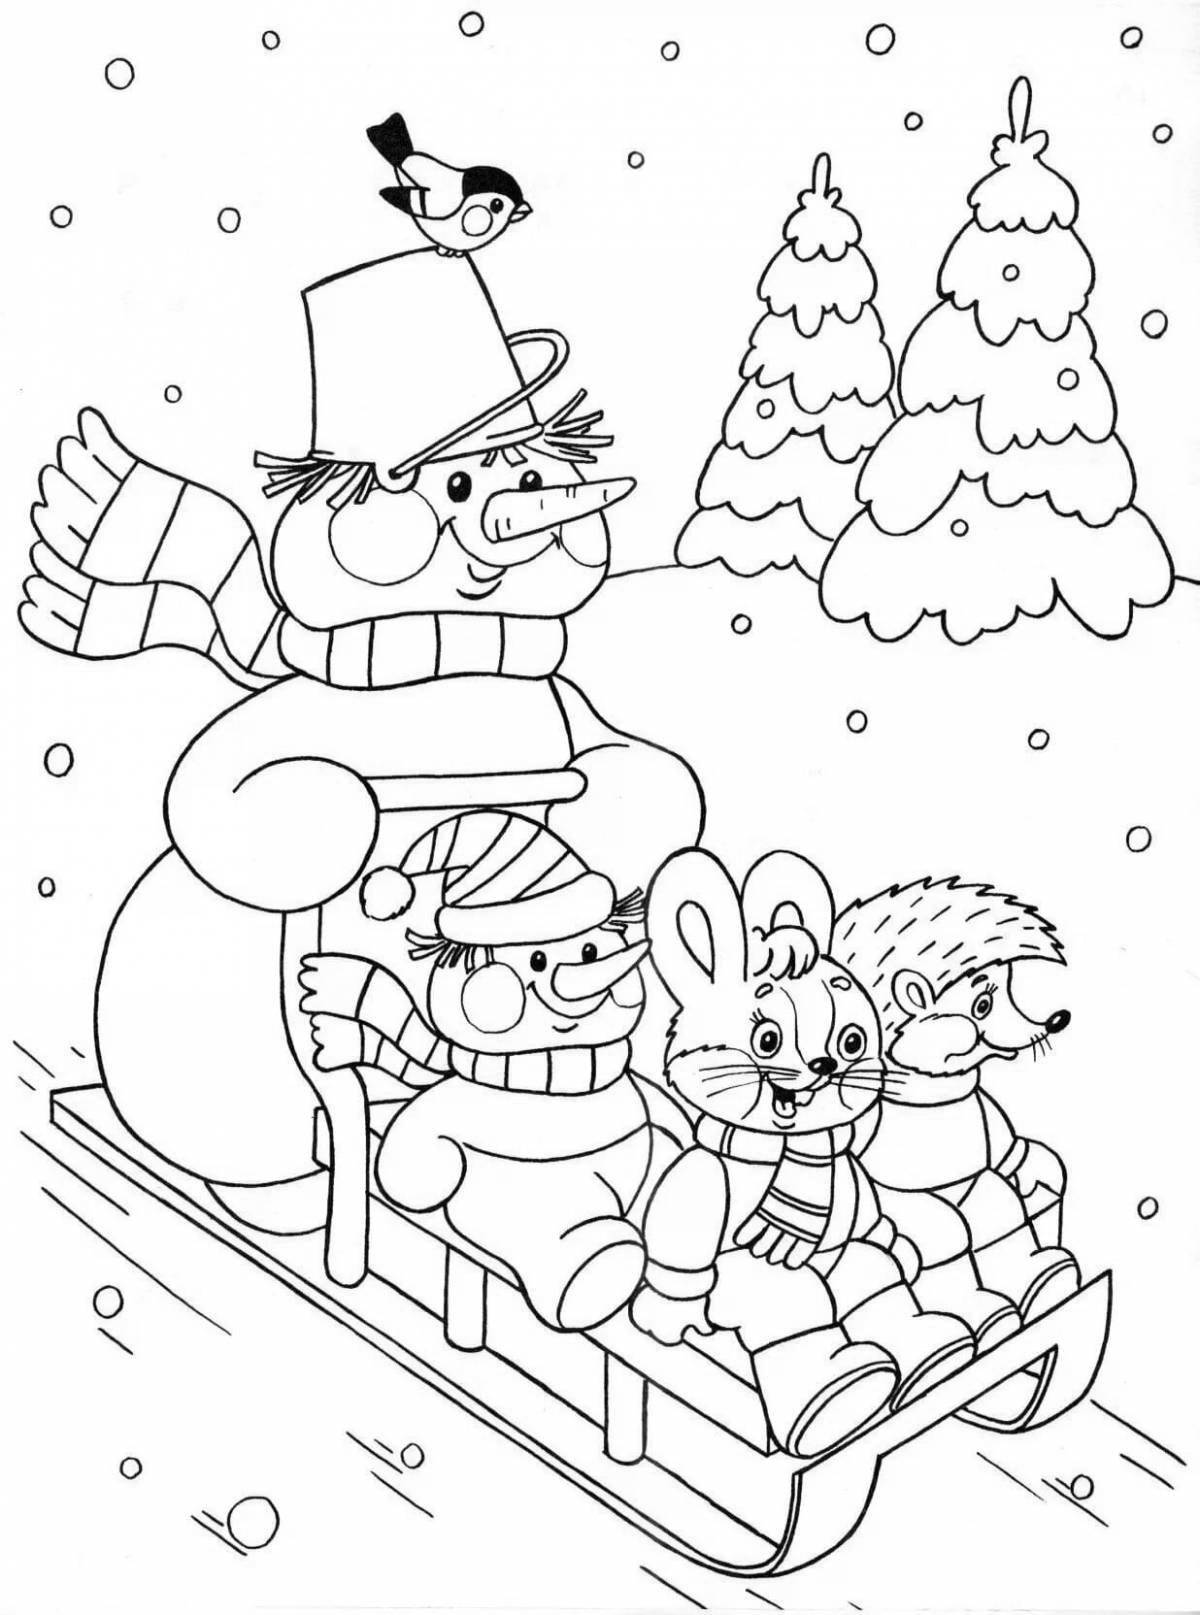 Animated winter coloring book for kids